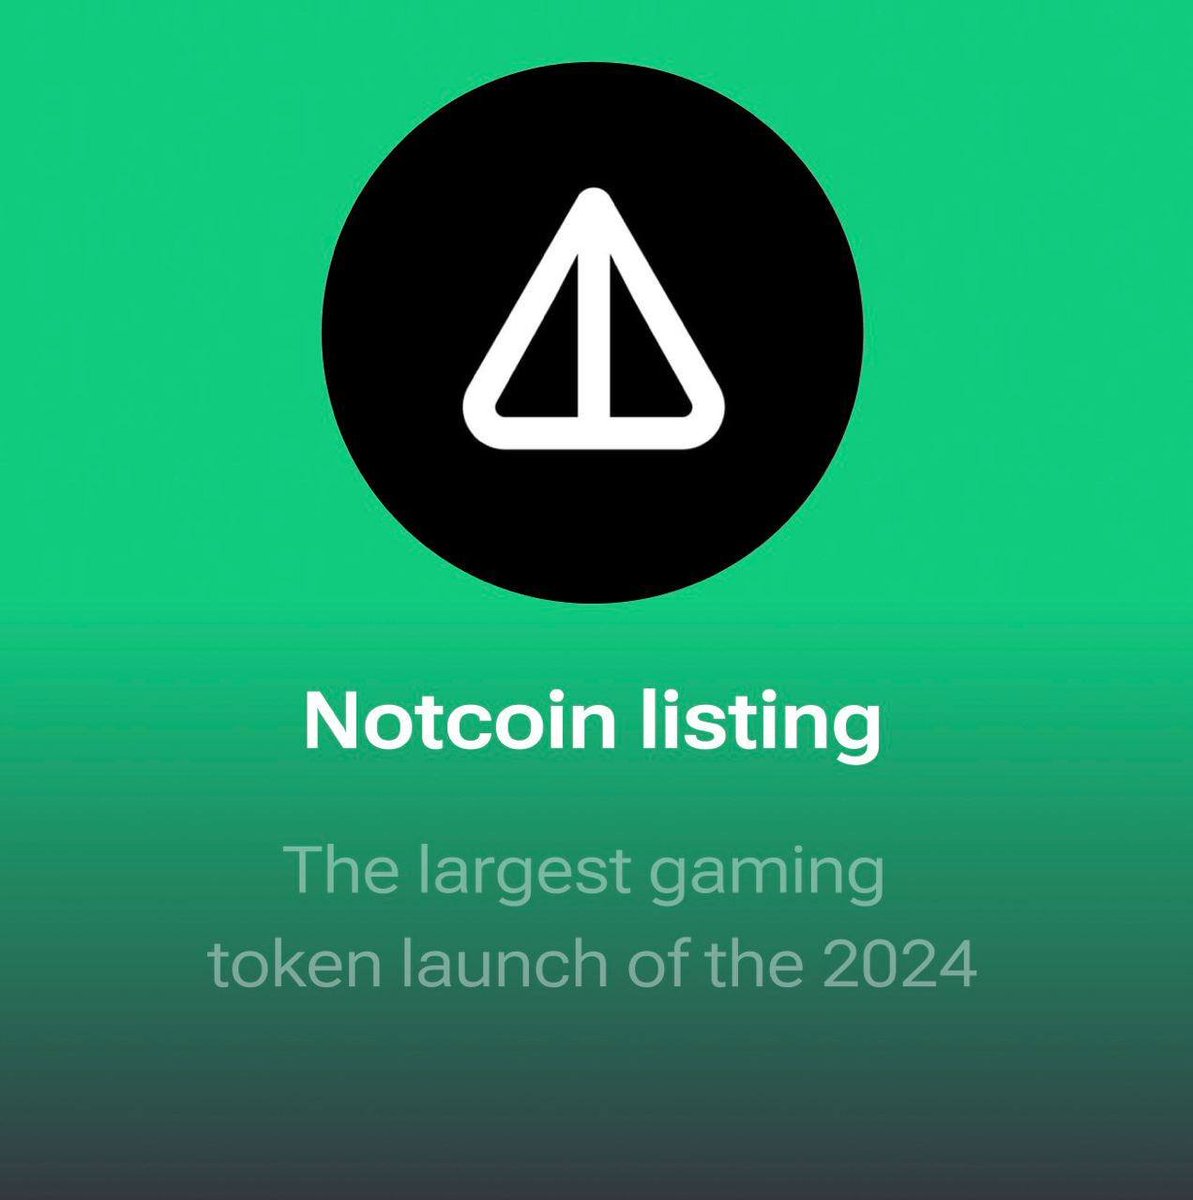 🚀 Notcoin has already become legendary, with participants in the project earning billions of dollars seemingly out of nowhere.

🐹 We're aiming for an even cooler and more profitable project for everyone

💎 We consider it's fair to double the revenue from the Notcoin card for